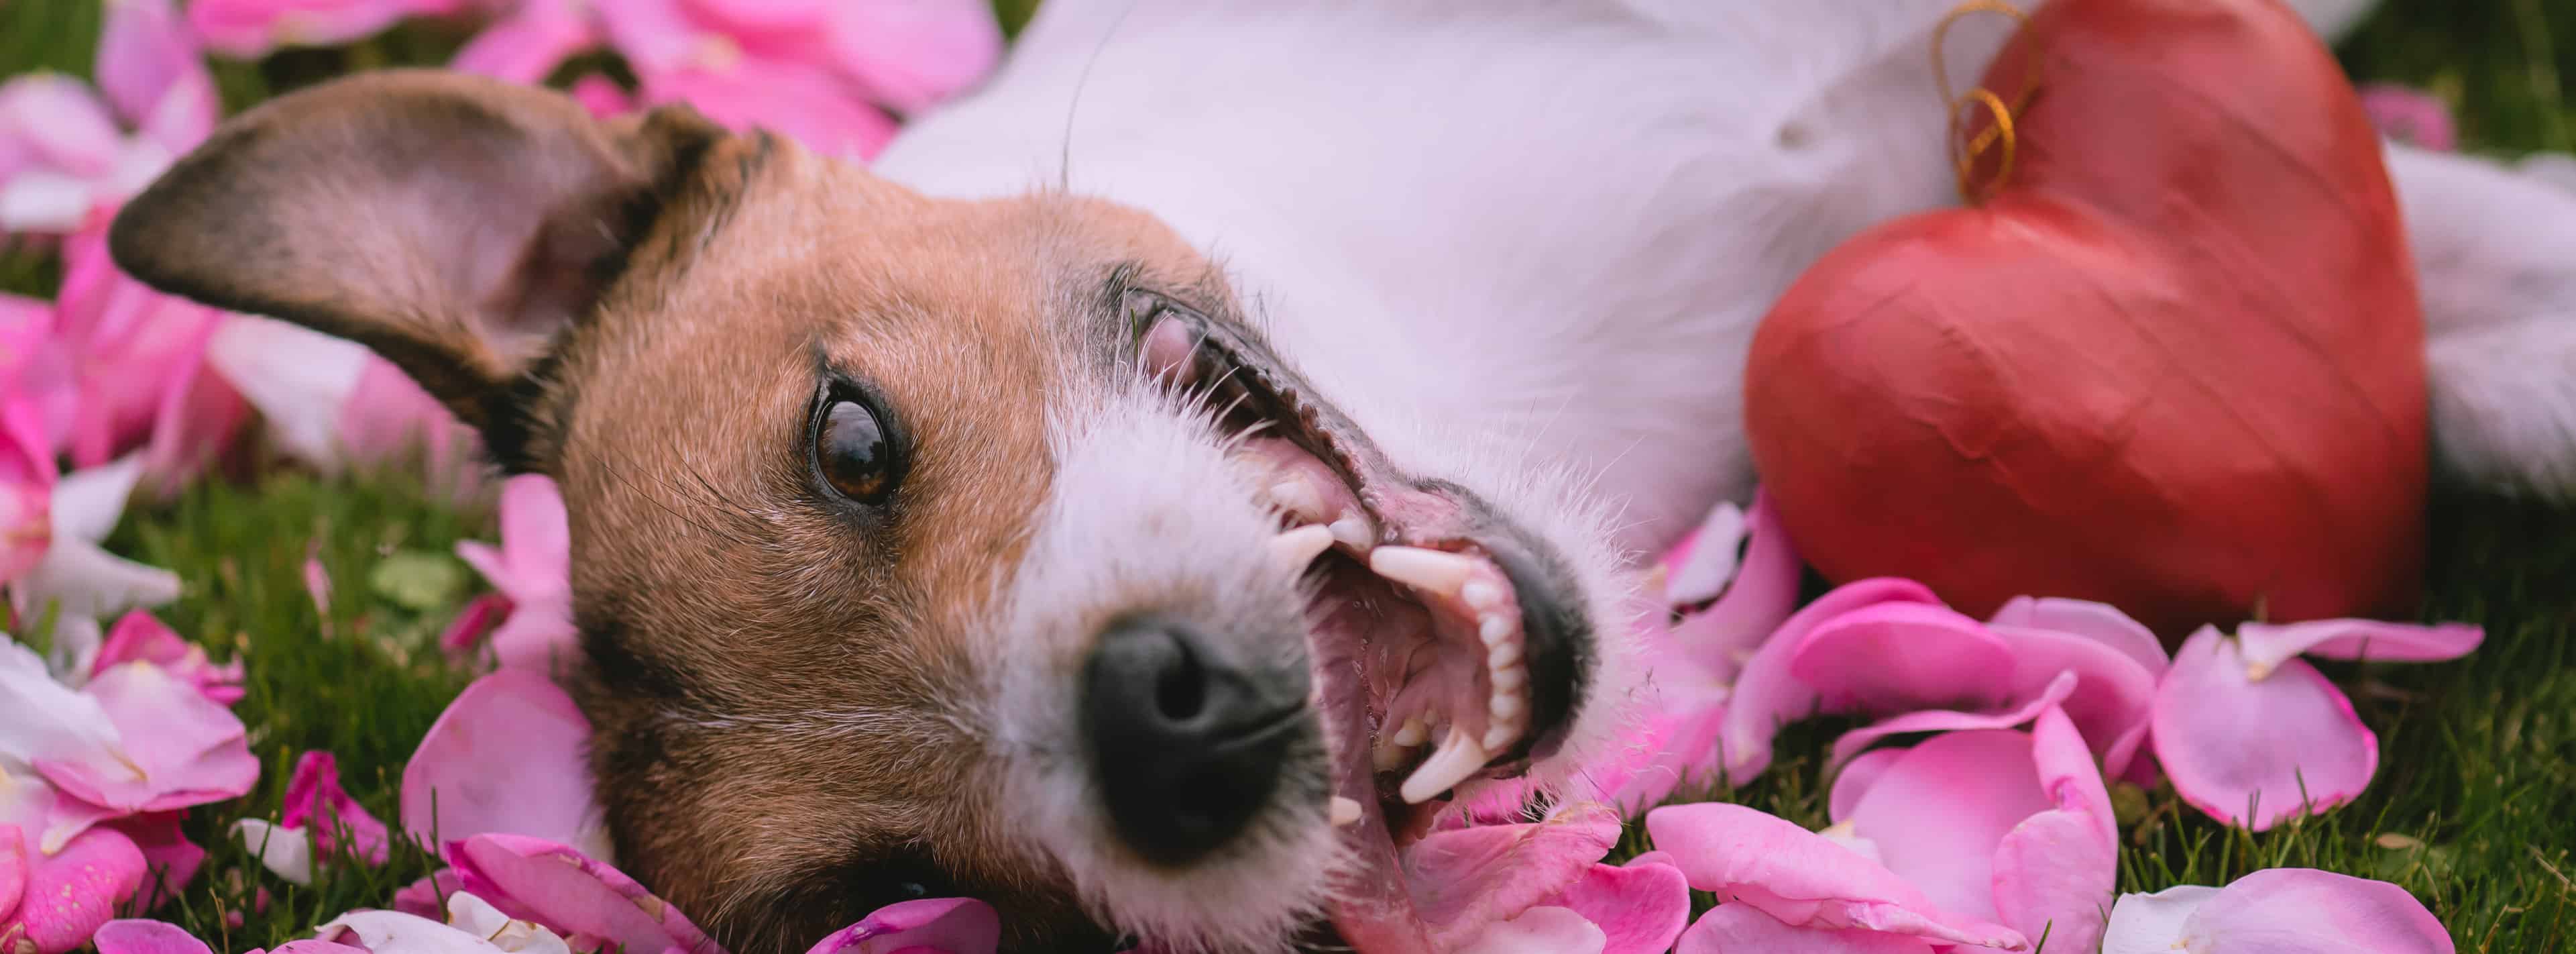 Your Dog May Be a Better Valentine